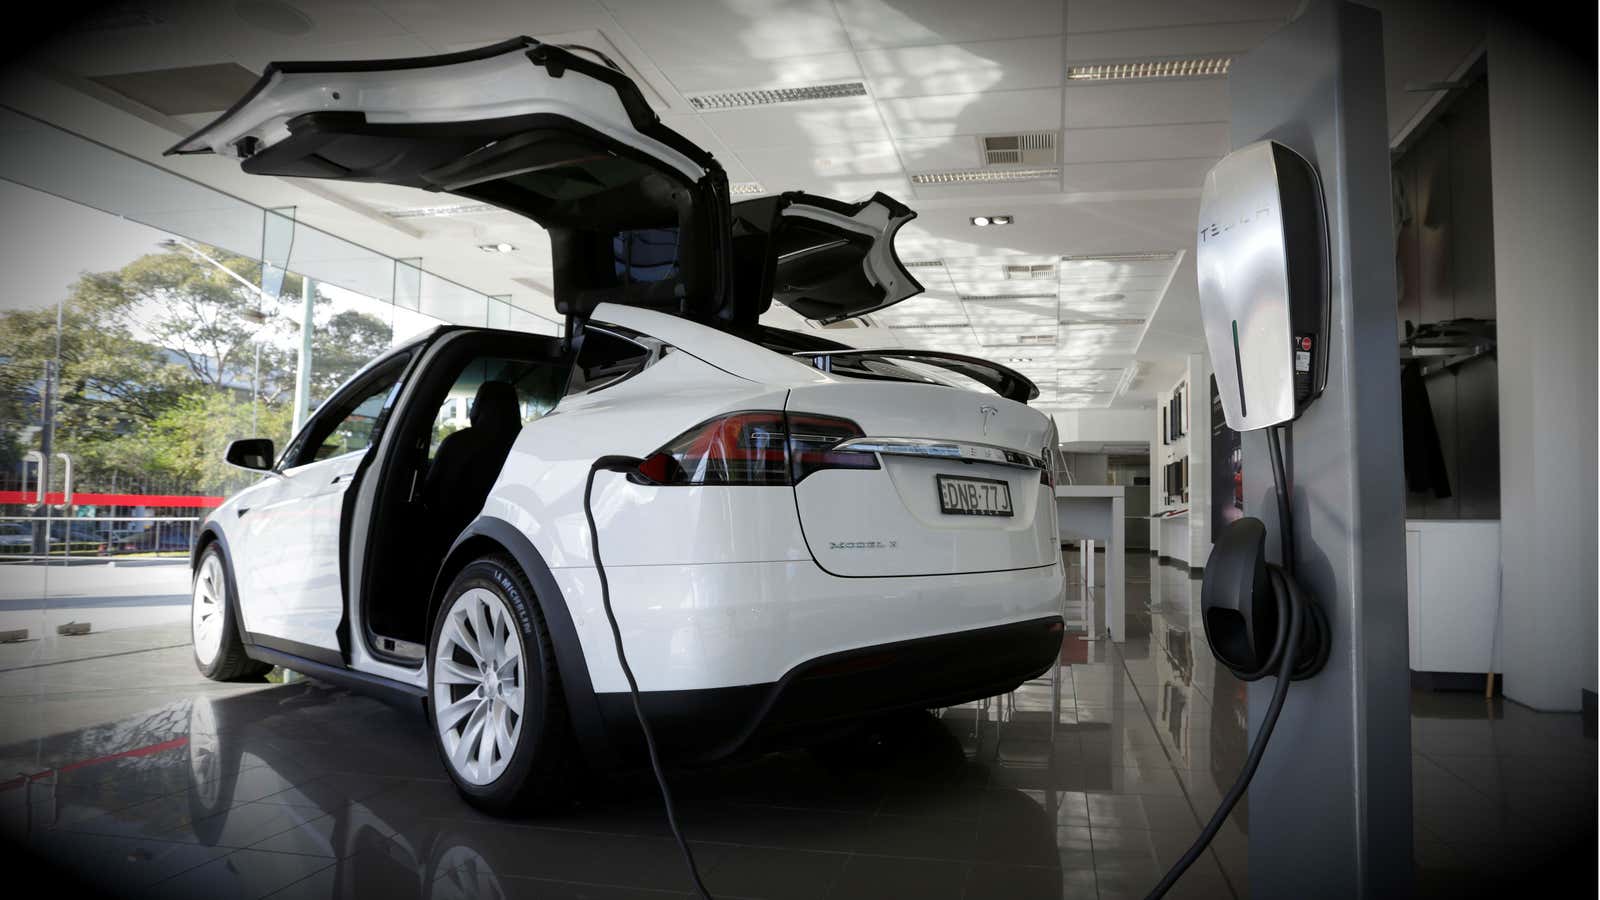 New US building codes will make every home ready for electric cars